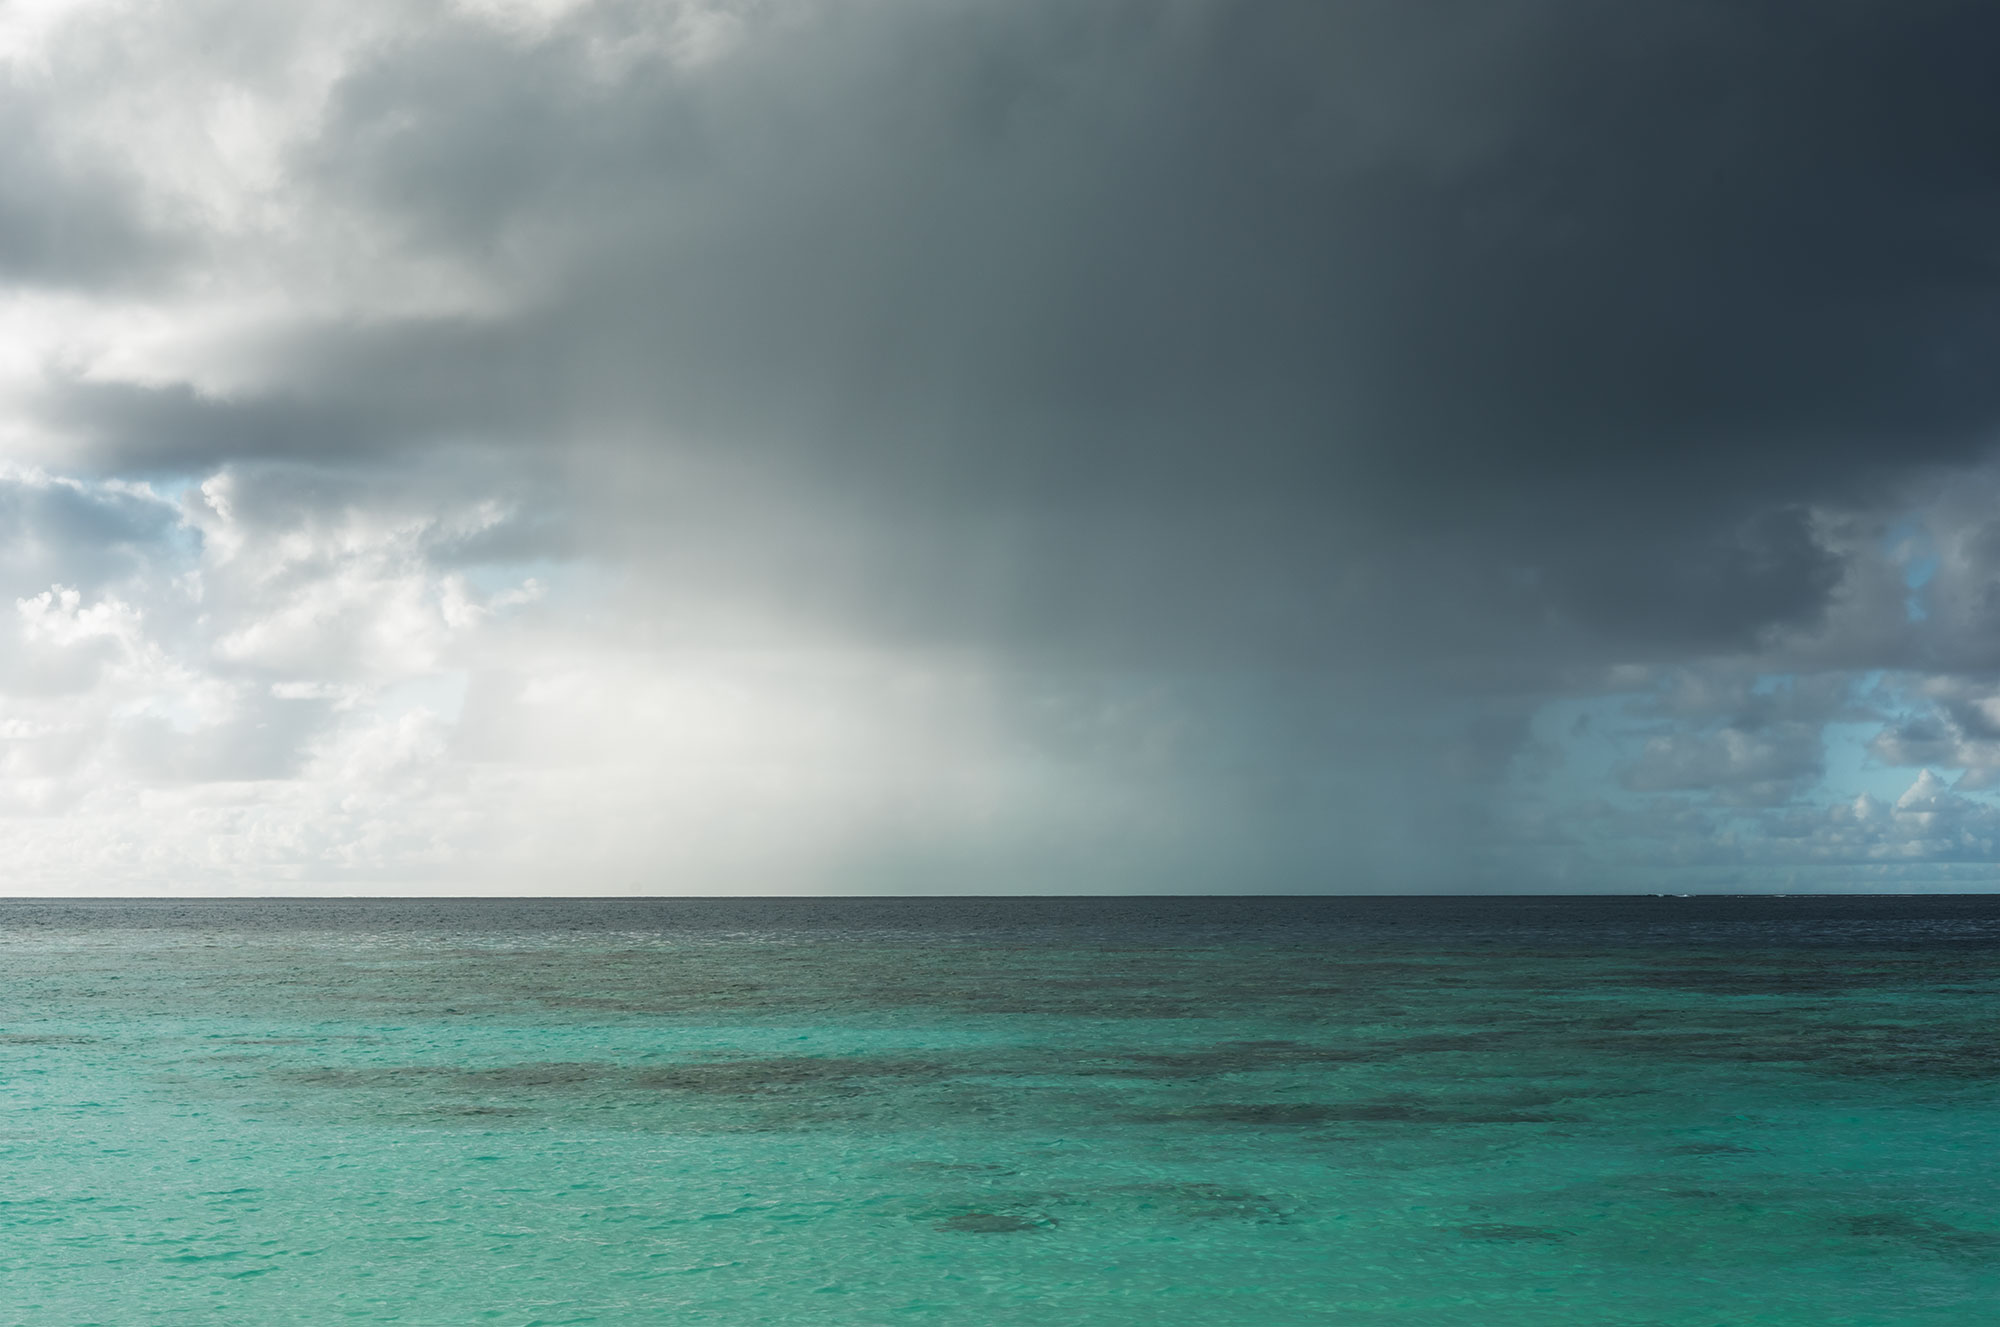 Landscape photograph capturing the stunning turquoise sea of the Maldives during a rainstorm, creating a dramatic and serene scene.